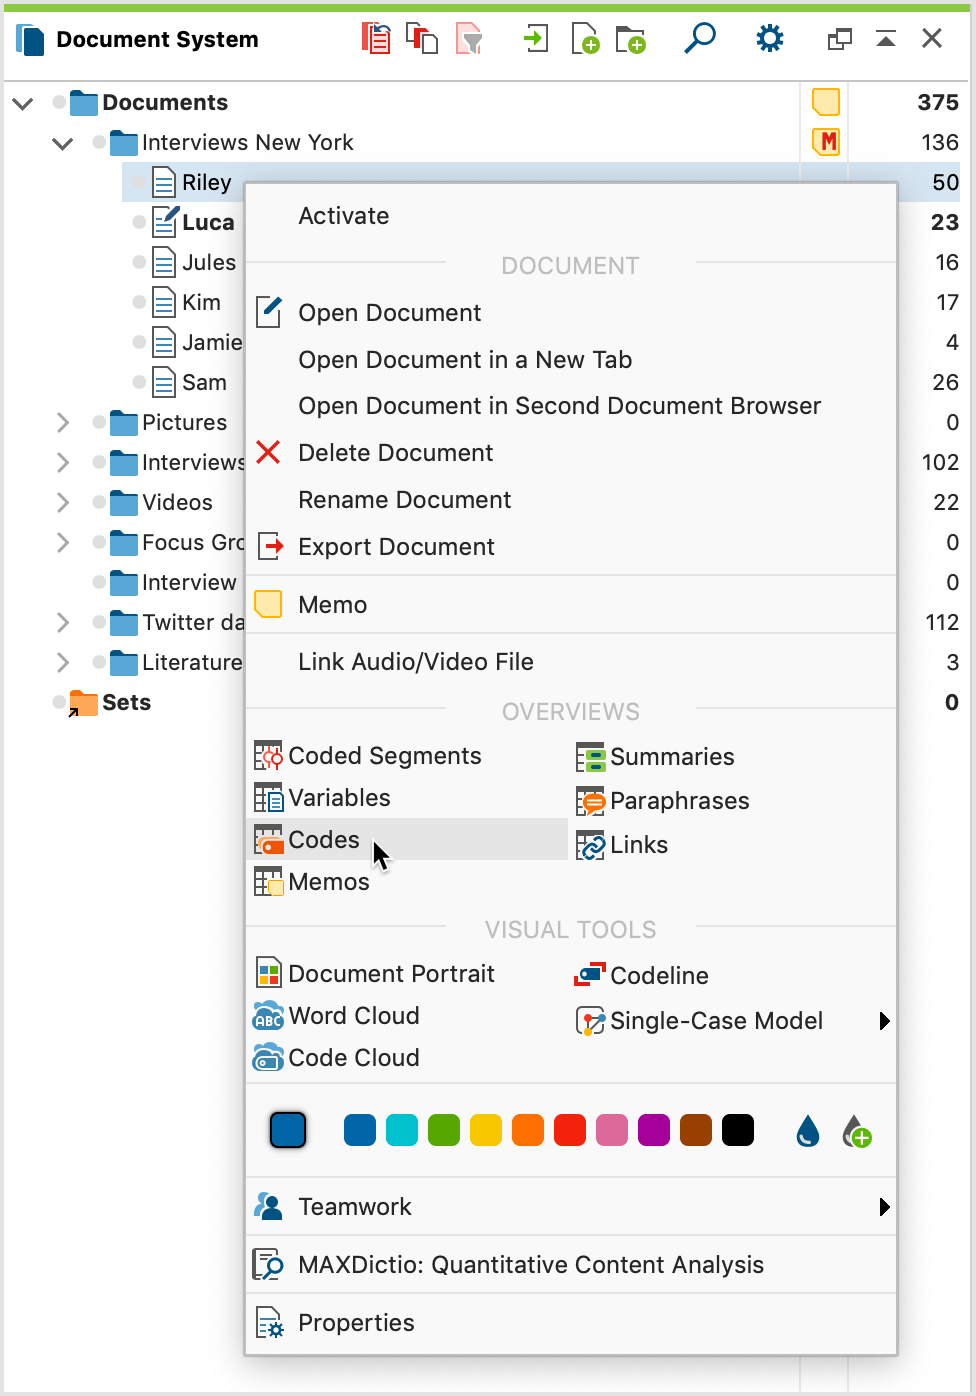 Open the Overview of Codes in the context menu of a Document Group